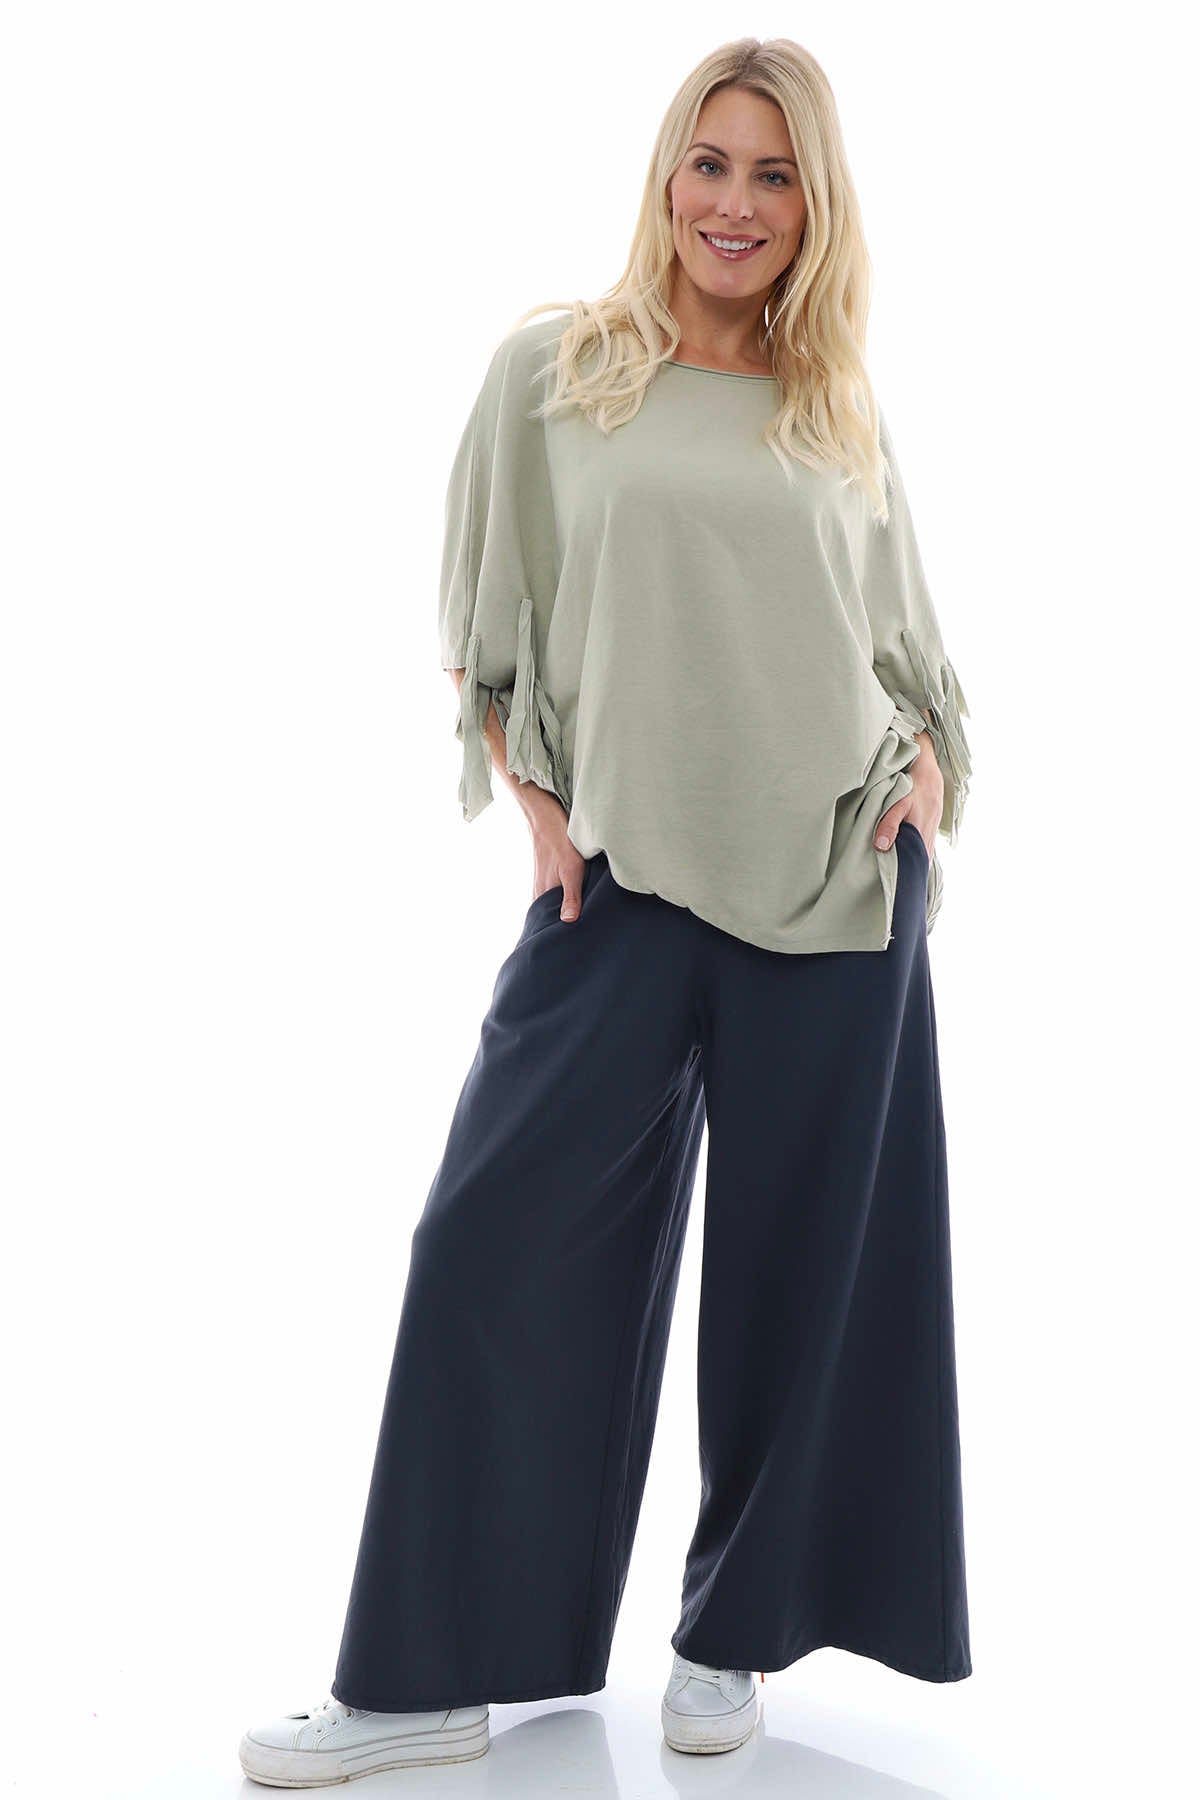 Betina Cotton Trousers Charcoal